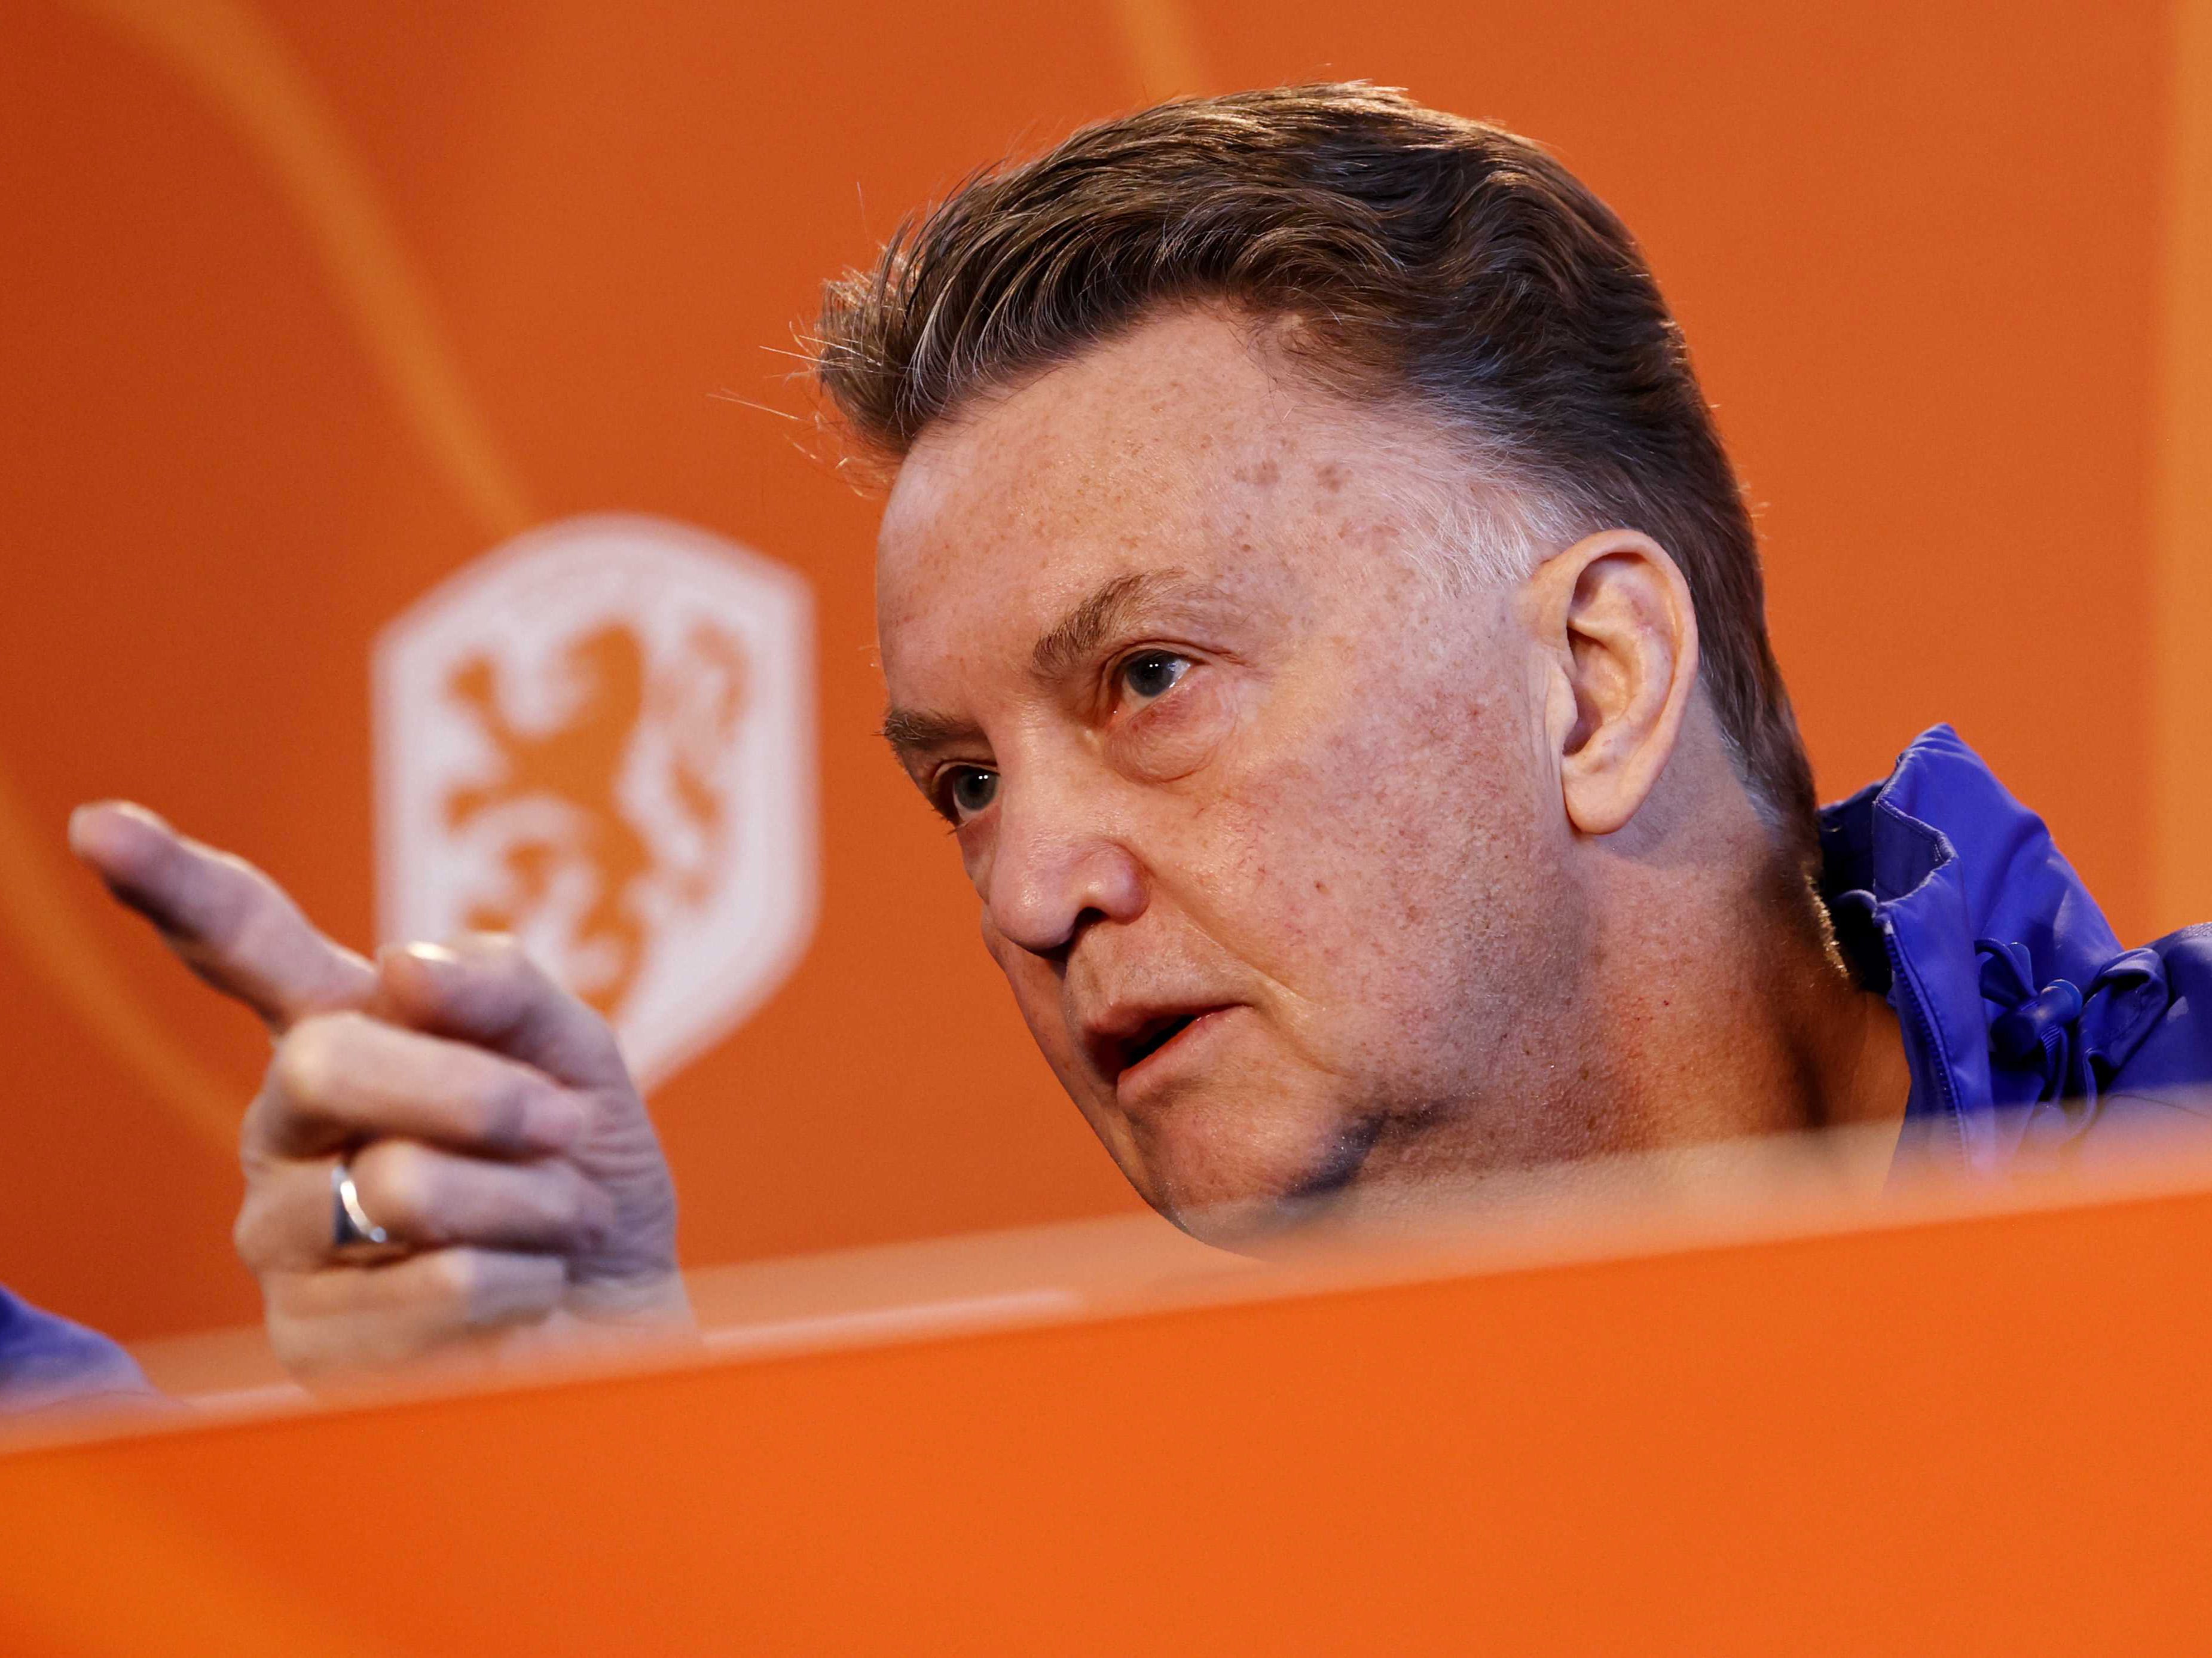 Louis van Gaal will lead the Netherlands at the World Cup